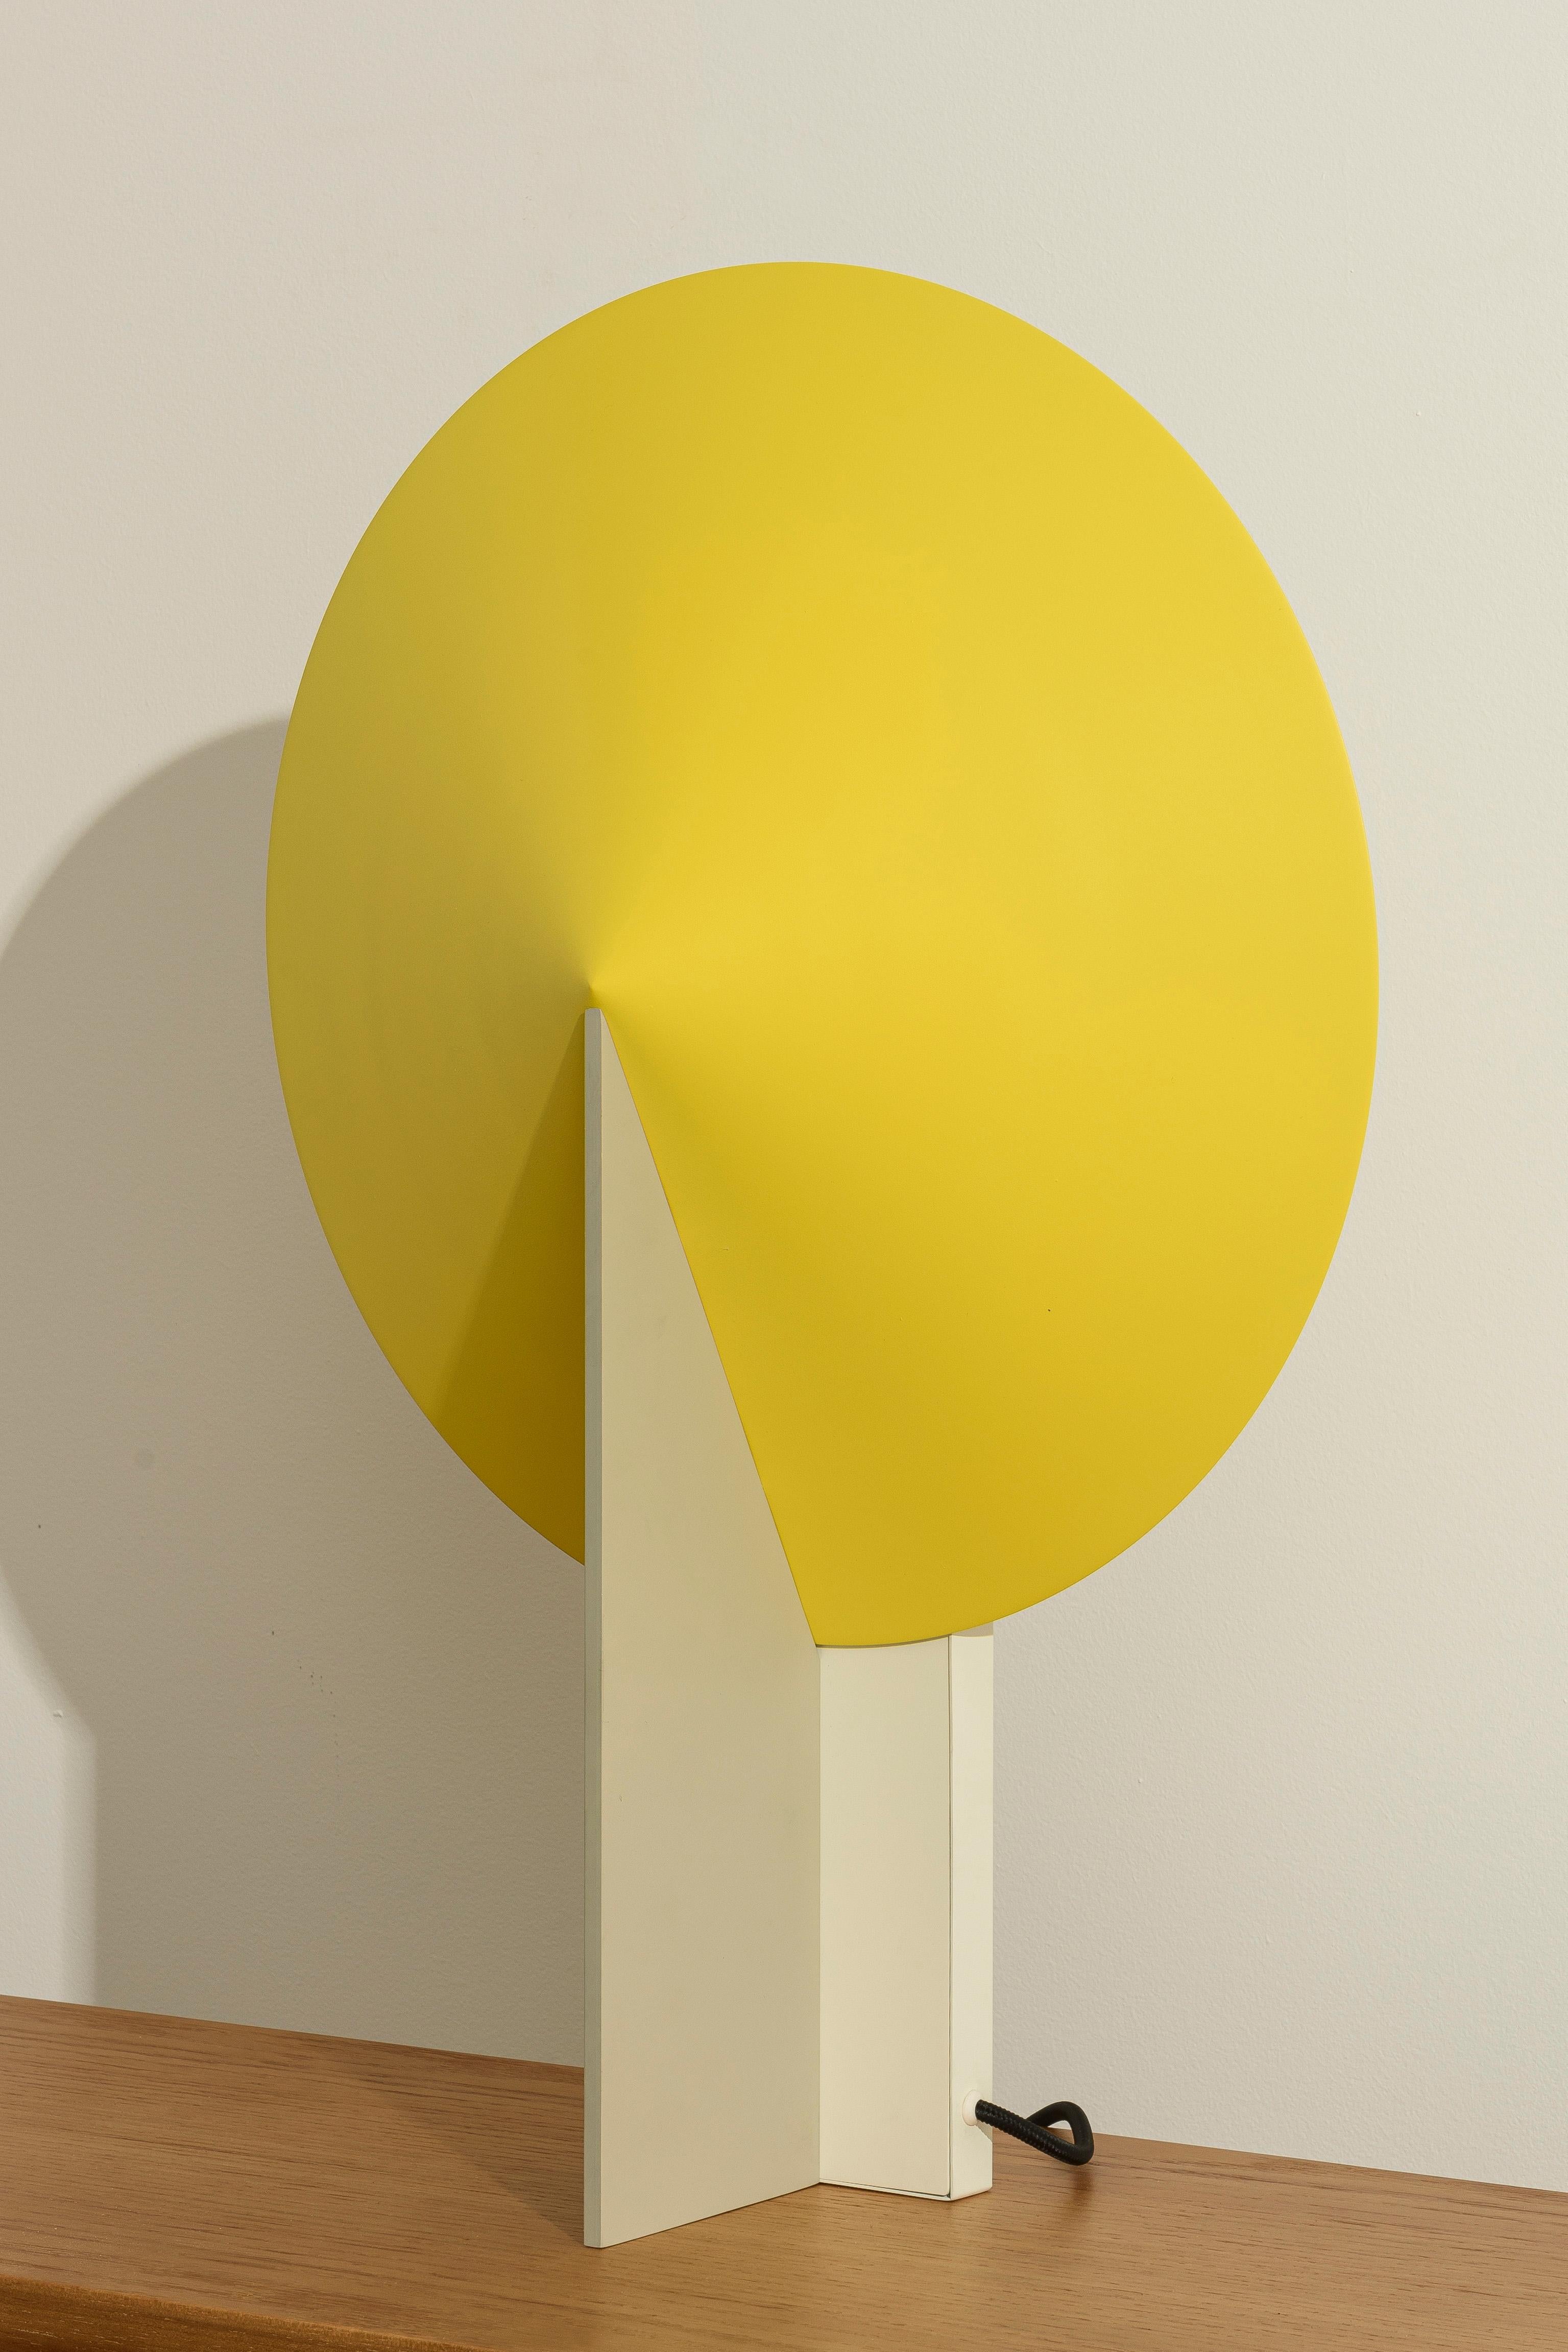 Aluminum Orbe Table Lamp, by RAIN, Contemporary Lamp, Brass & Aluminium, Yellow & White For Sale